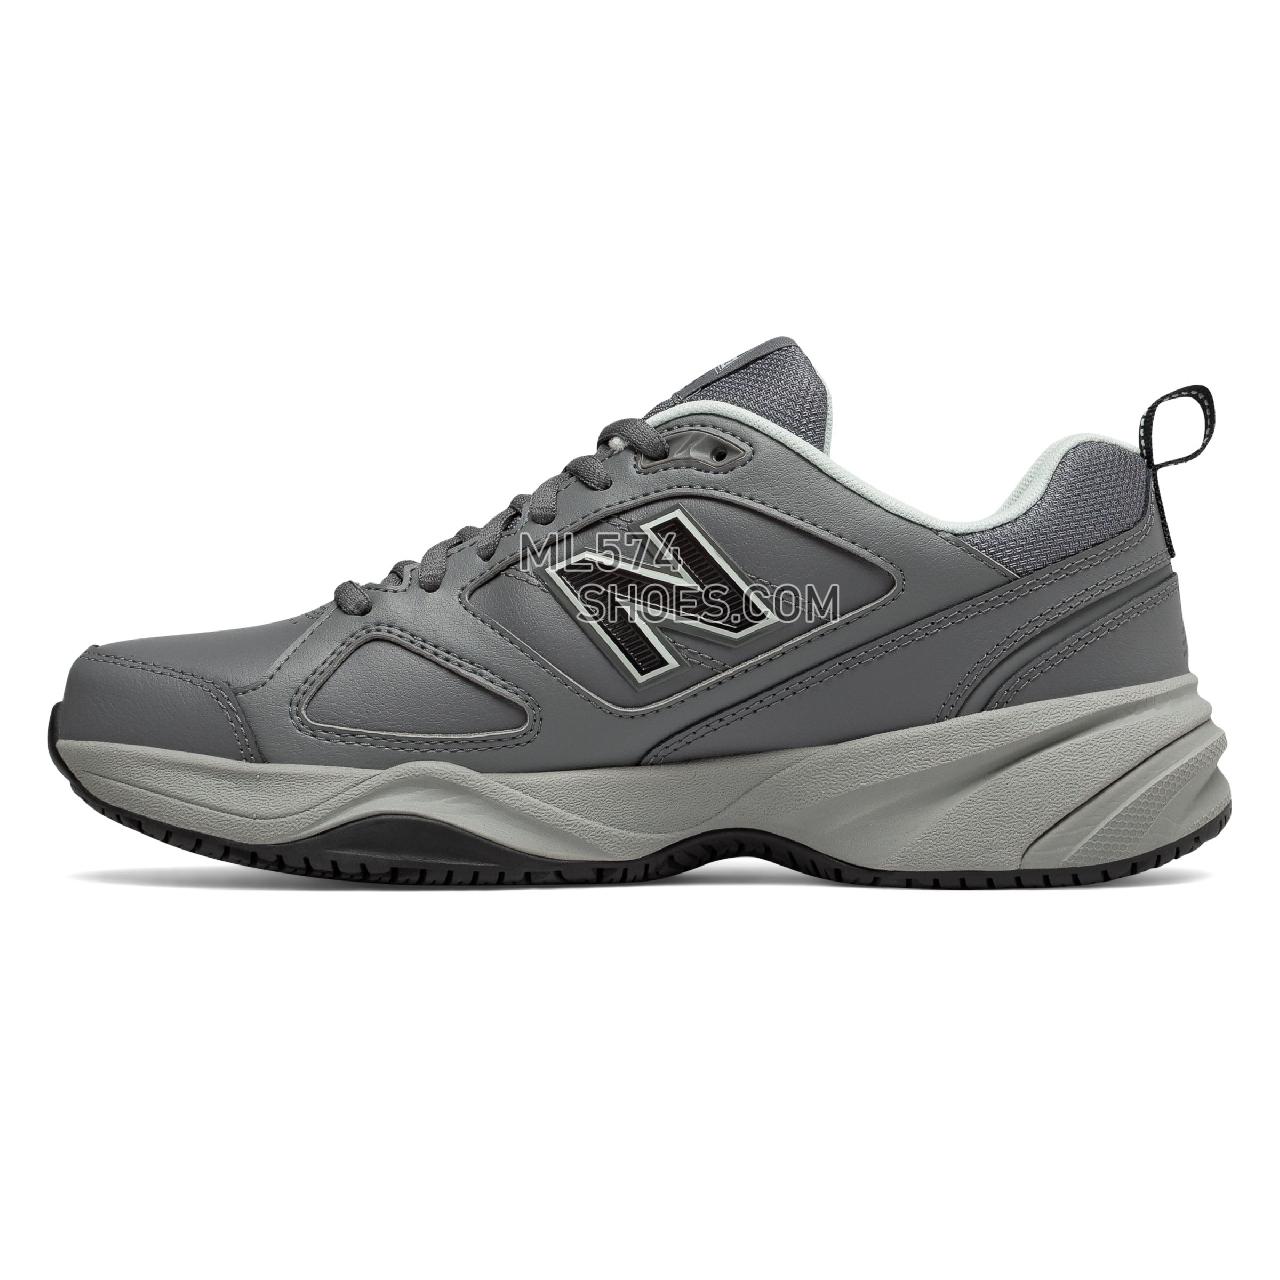 New Balance Slip Resistant 626v2 - Women's 626 - Industrial Grey with Navy - WID626D2